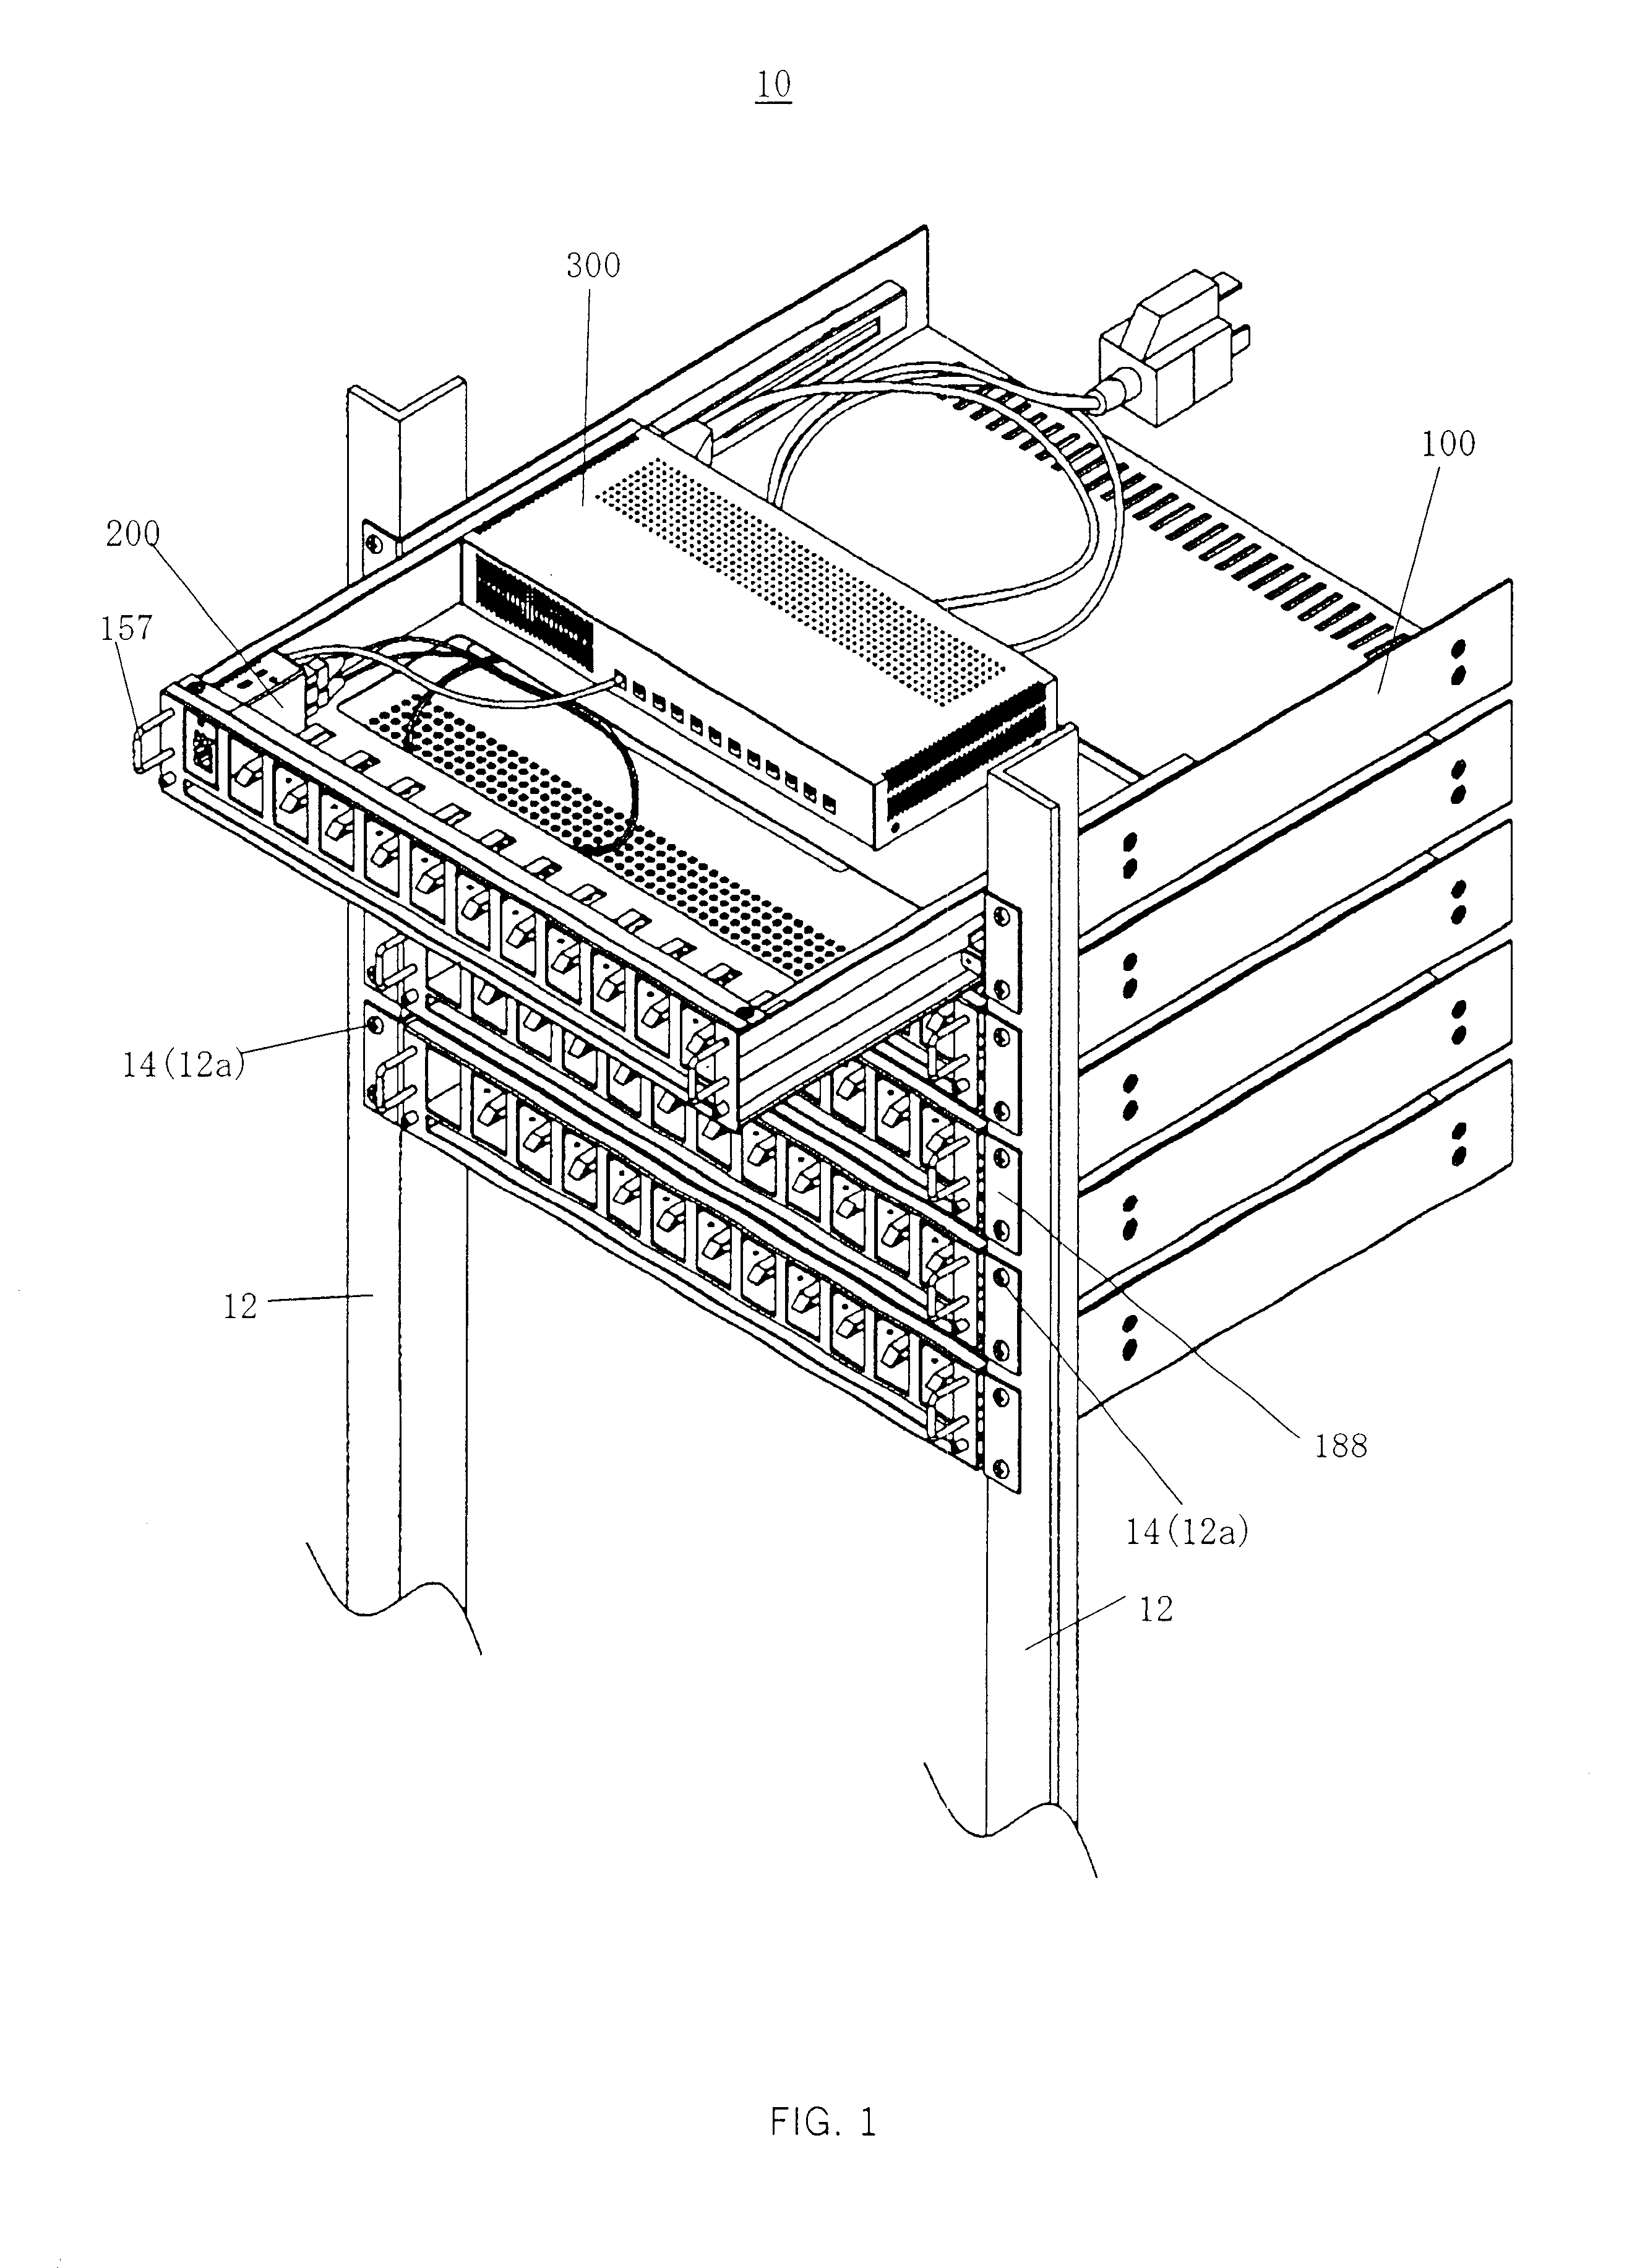 Accommodation apparatus for communication devices